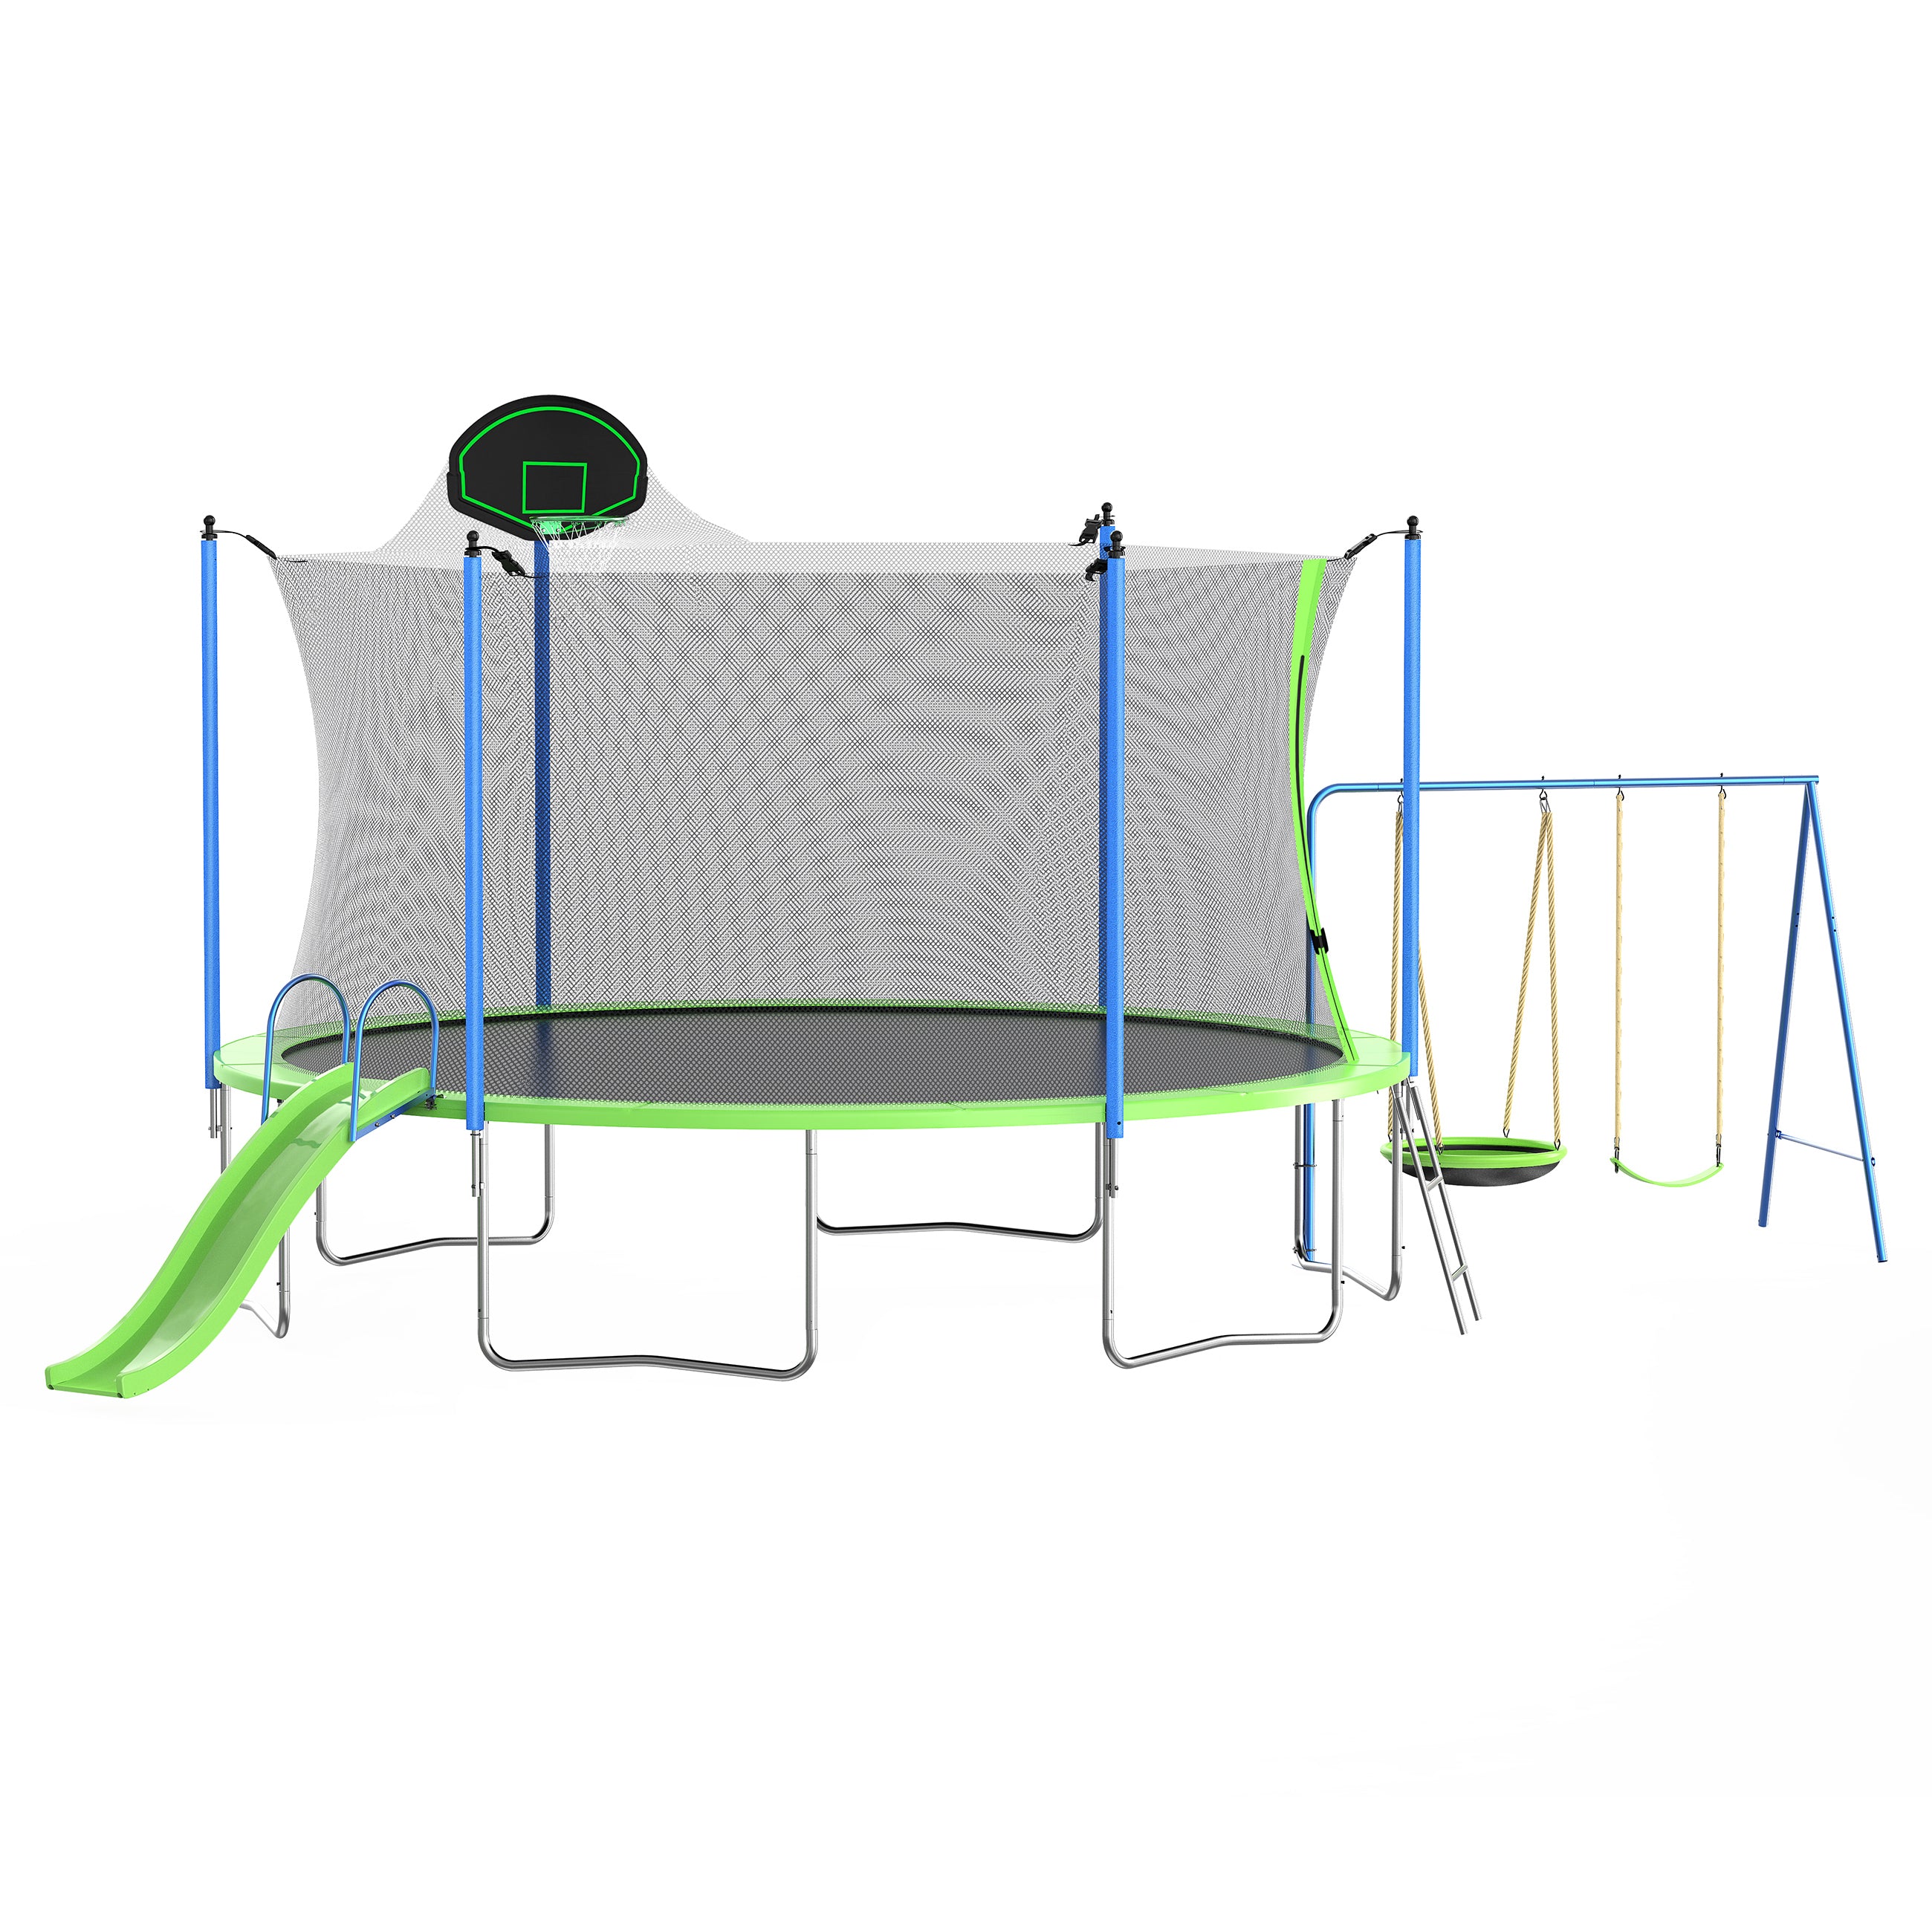 14FT Trampoline with Slide, Swings, and Basketball Hoop | ASTM Approved Large Recreational Outdoor Backyard Trampoline with Net and Ladder | Fun for Kids and Adults